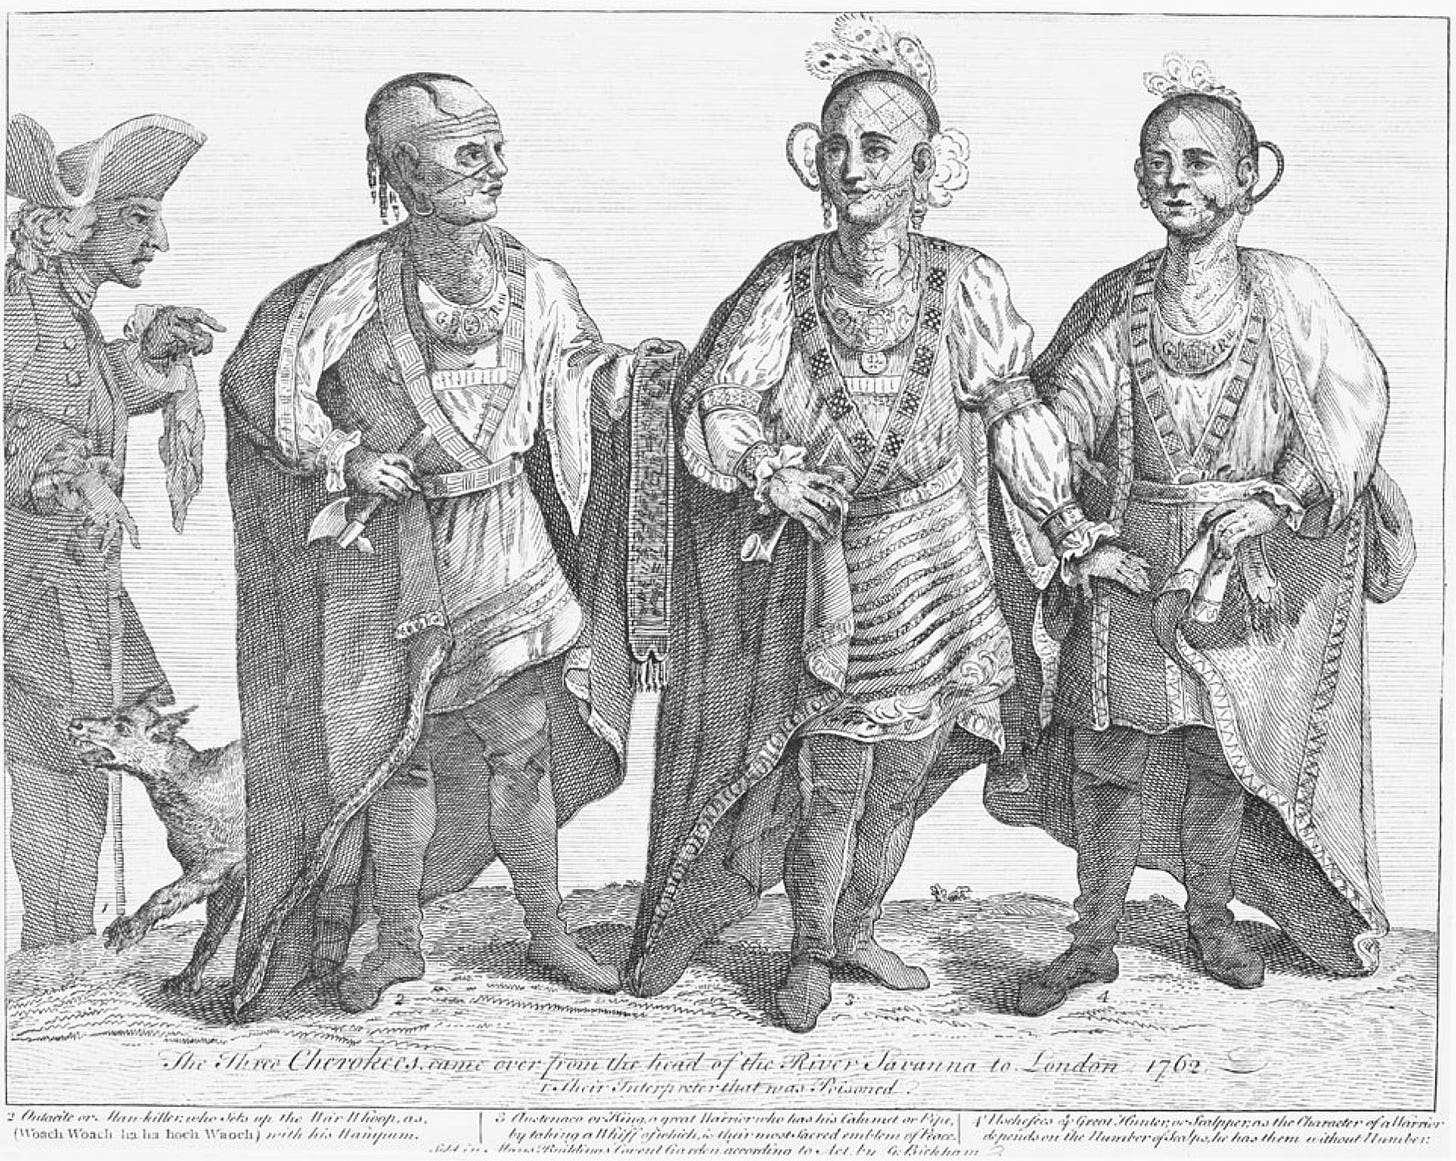 Three Cherokees in Traditional Dress with Englishman 